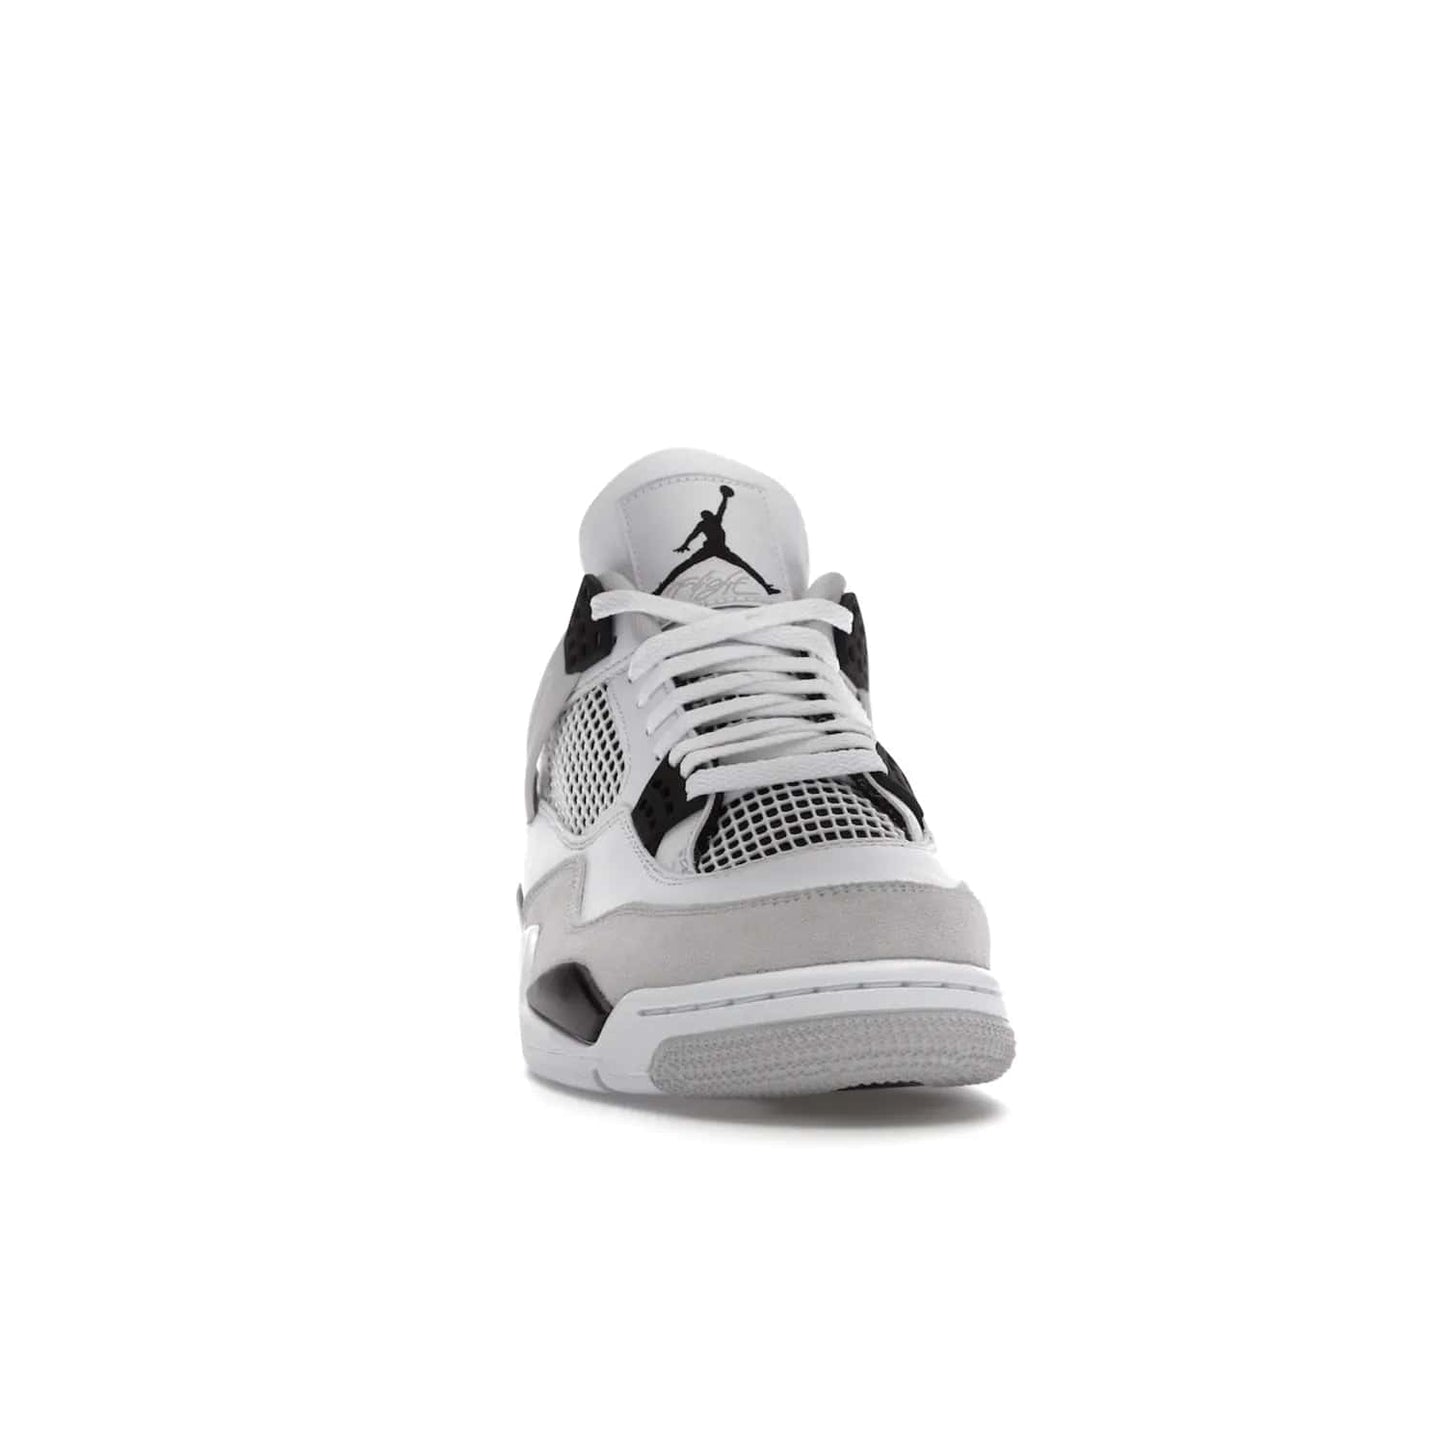 Jordan 4 Retro Military Black - Image 9 - Only at www.BallersClubKickz.com - Updated Air Jordan 4 style with a white/black/light grey sole and visible Air unit. Released in May 2022, offering timeless classic style and comfort.